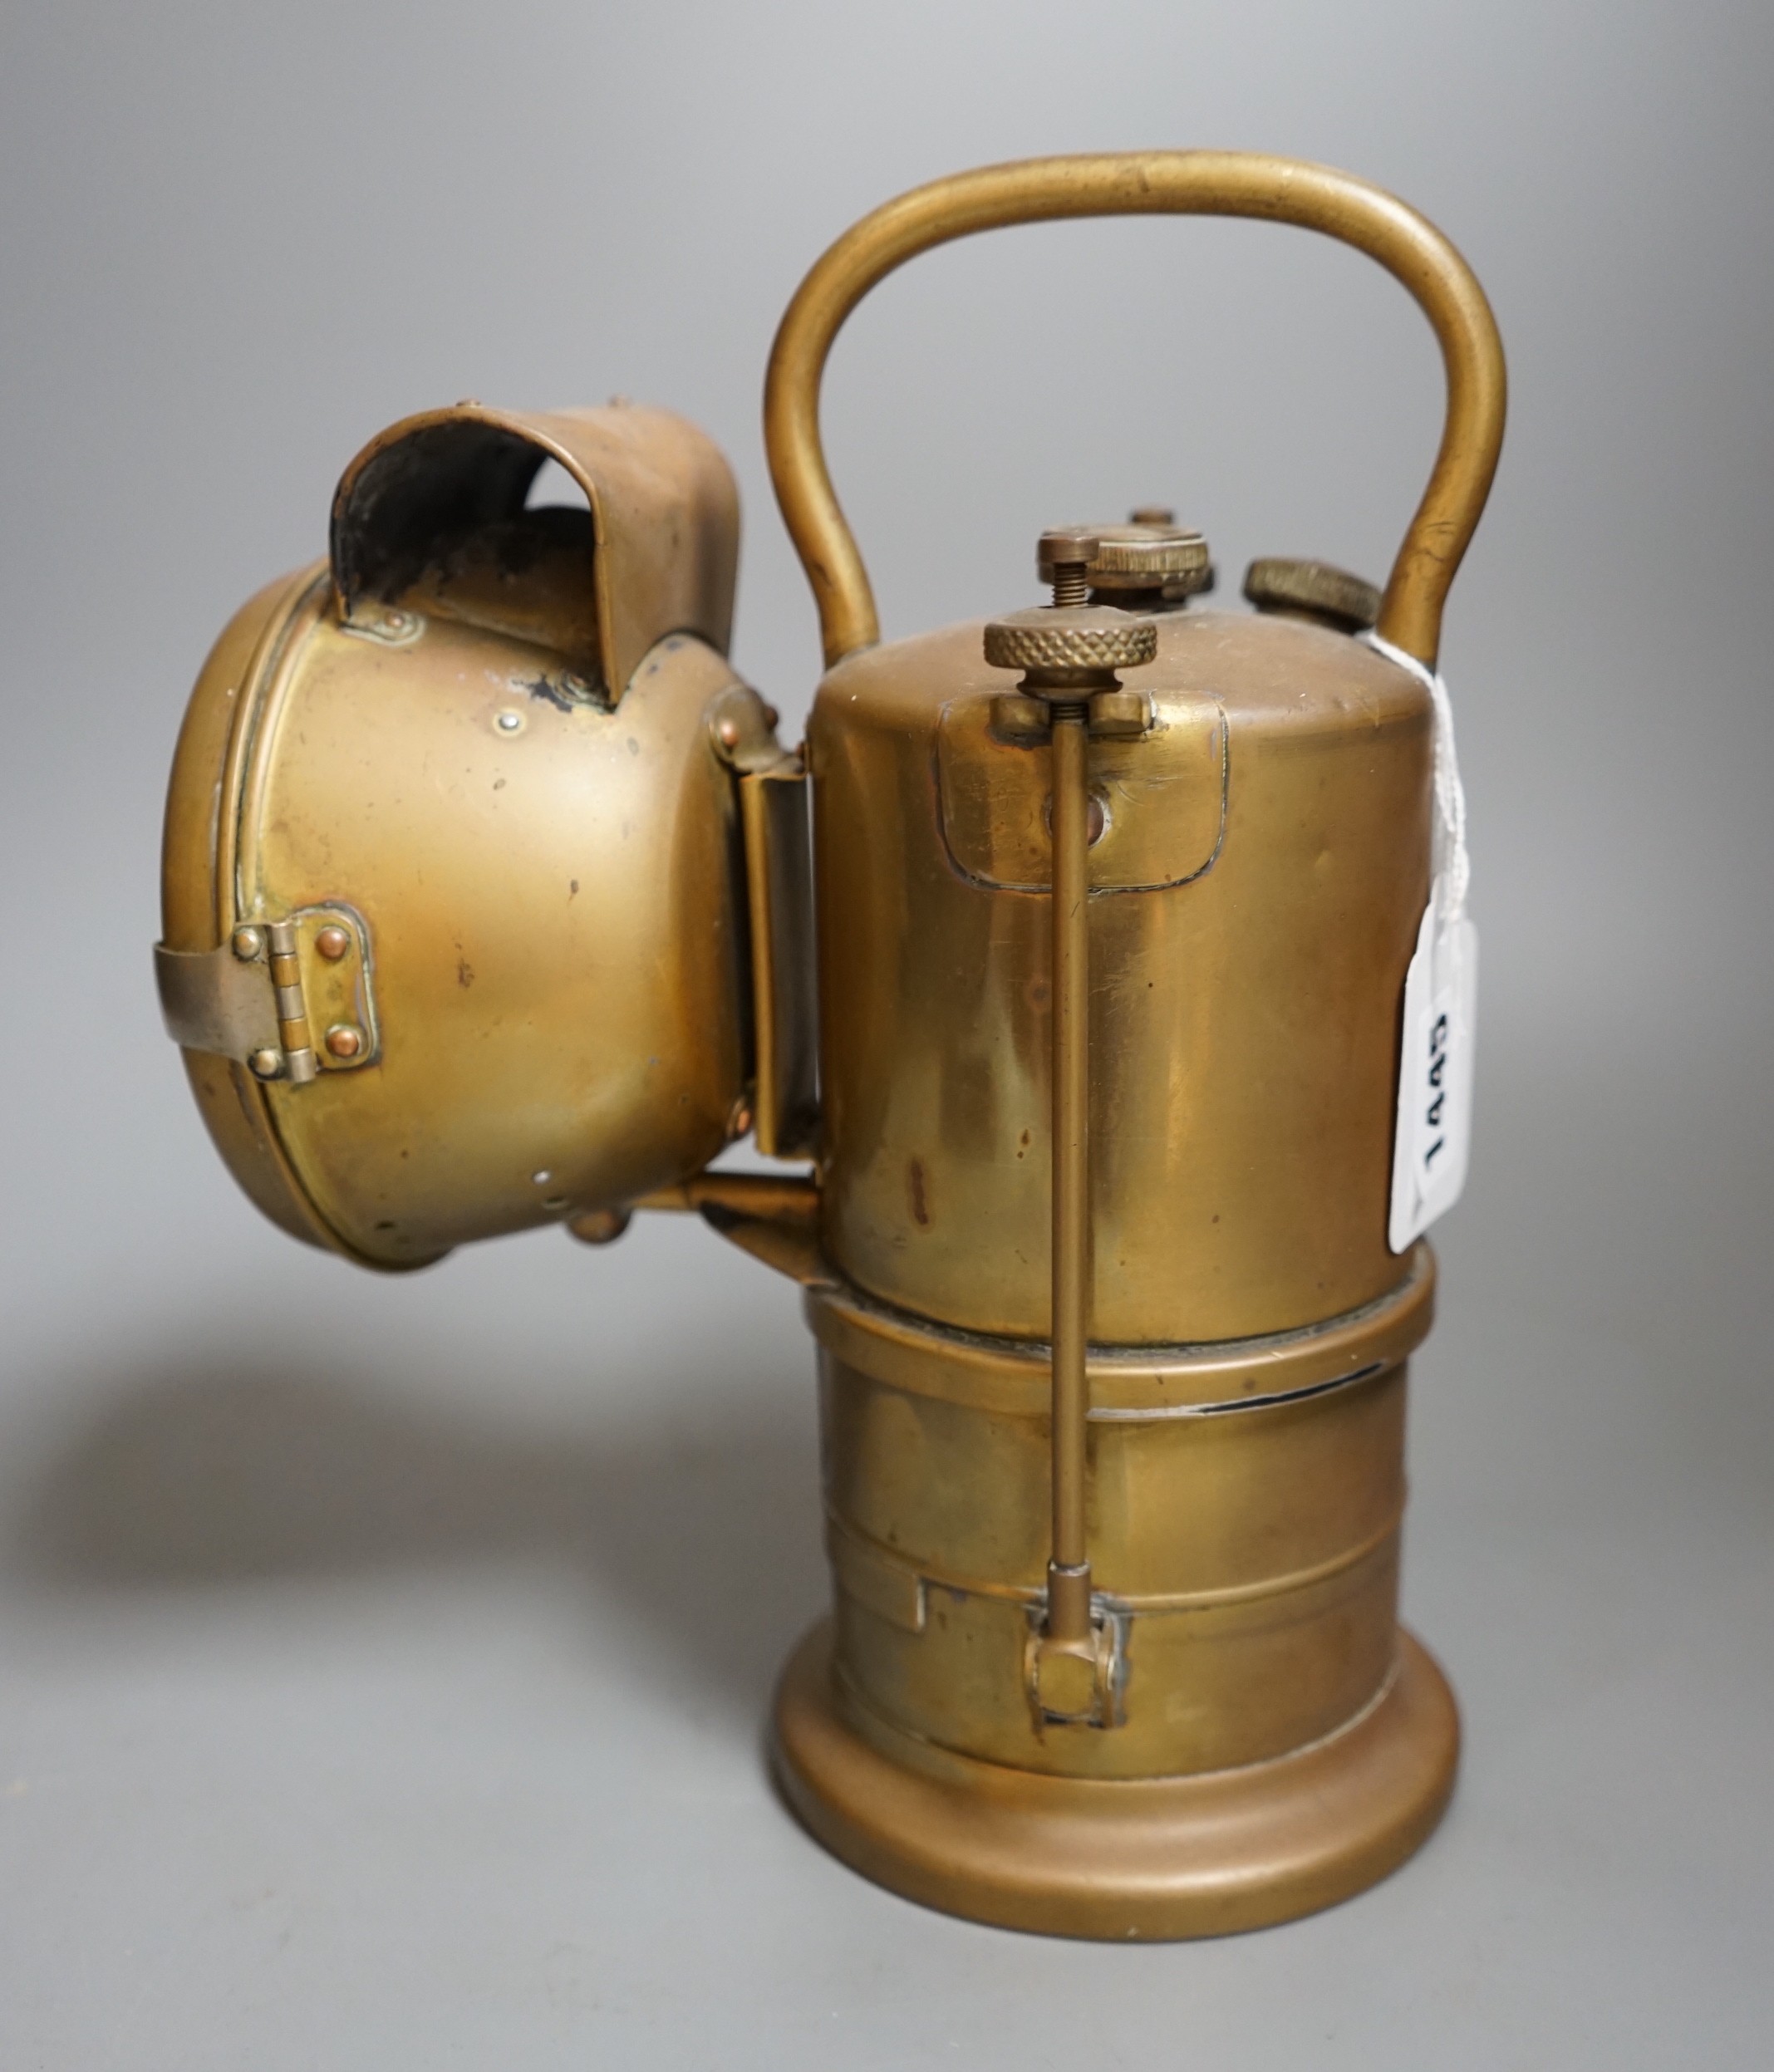 A LNWR railway inspection lamp, company ceased trading in 1922, 26cms high